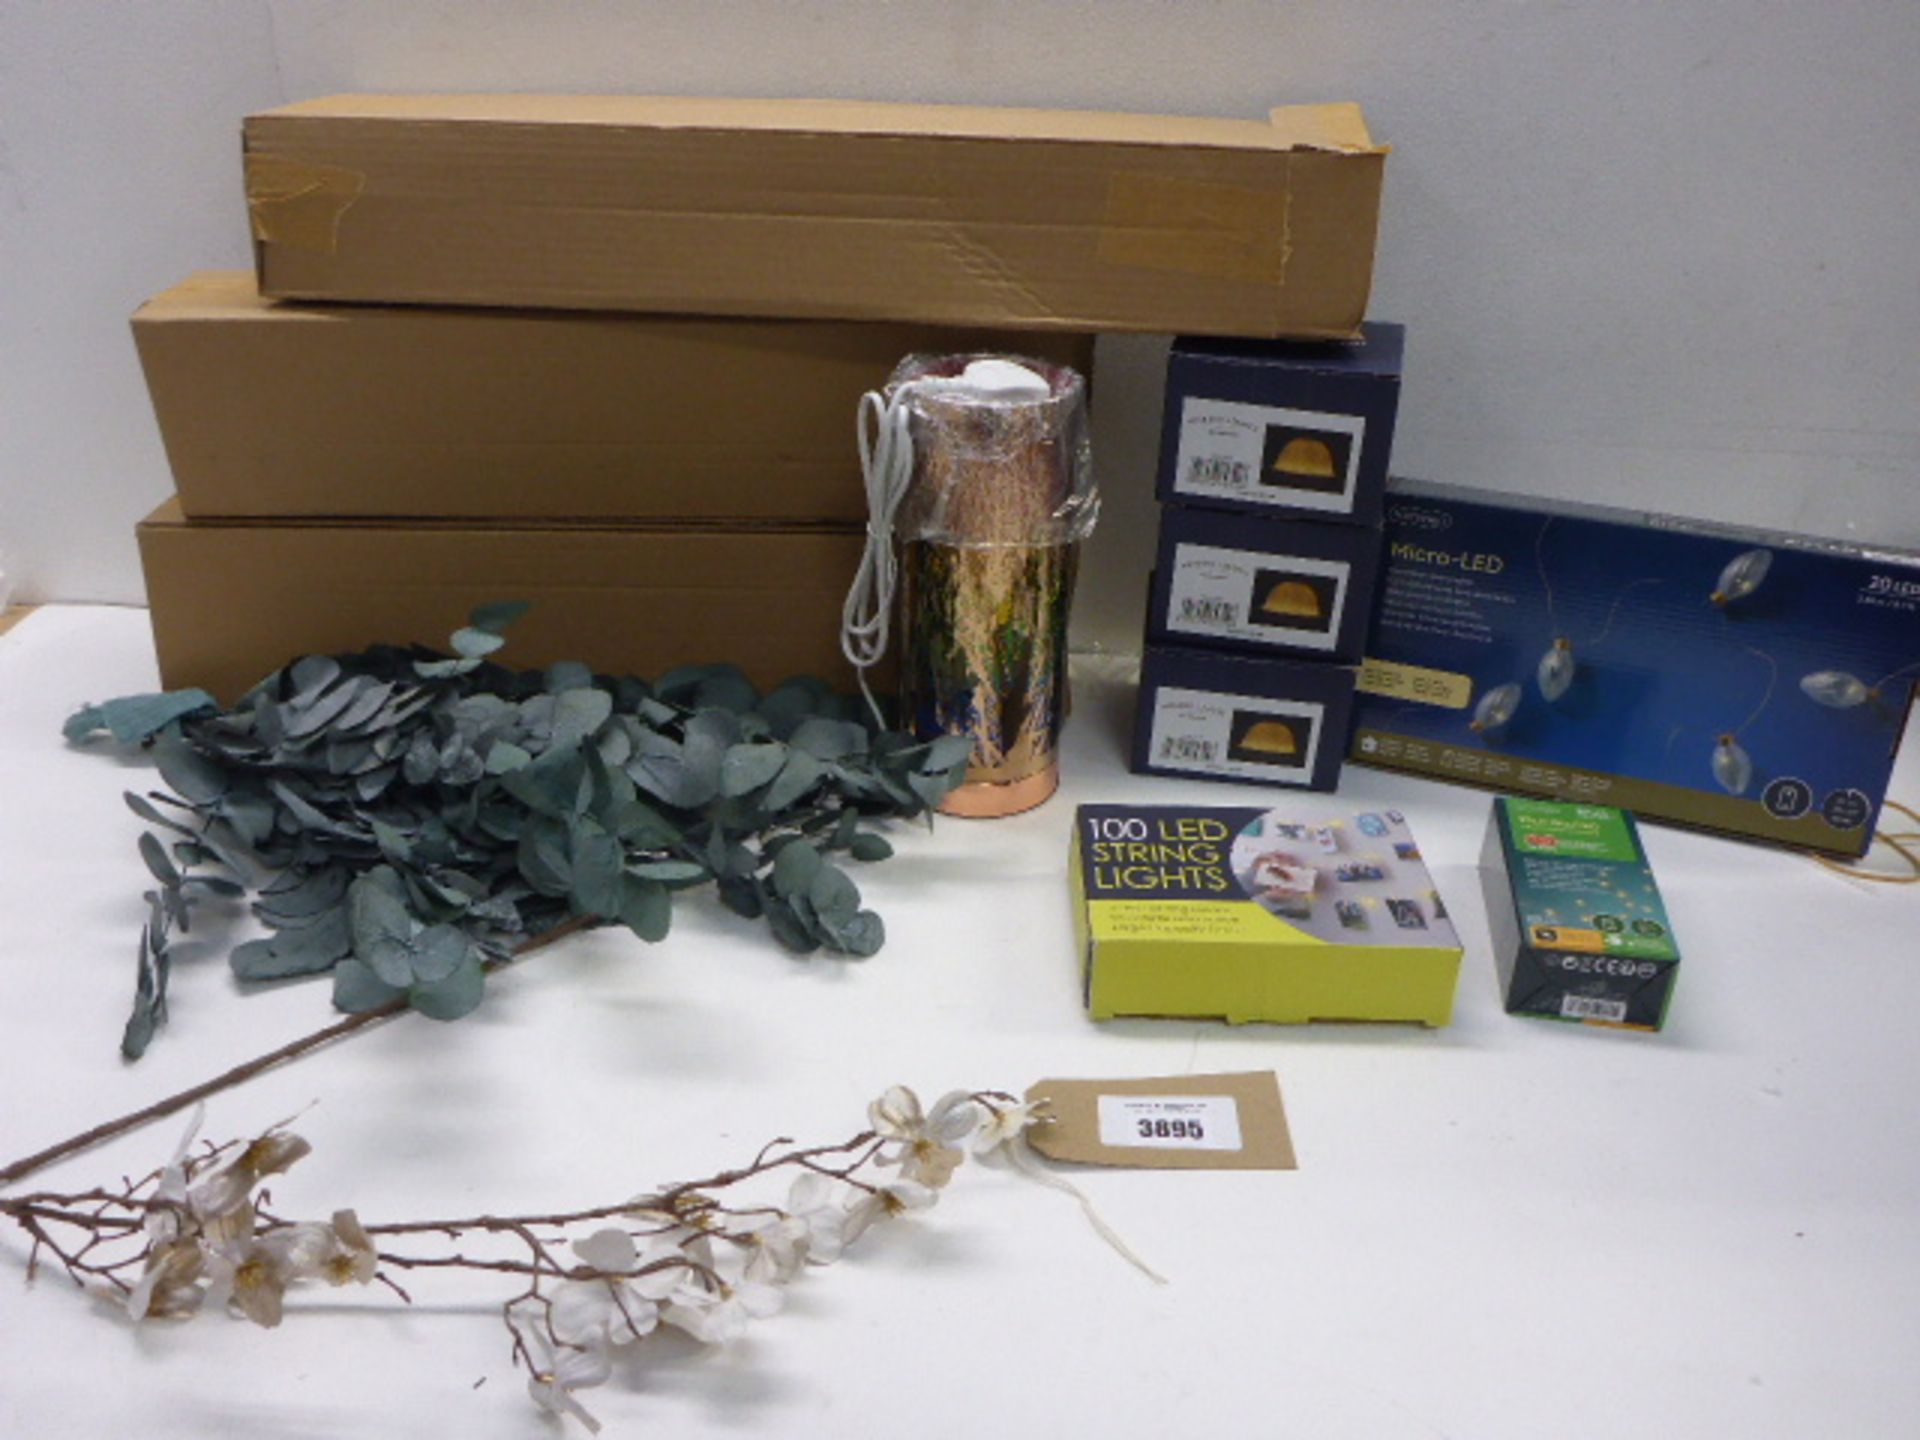 Tea light melter, Nordic lights, String lights and 3 boxes artificial leaf branches